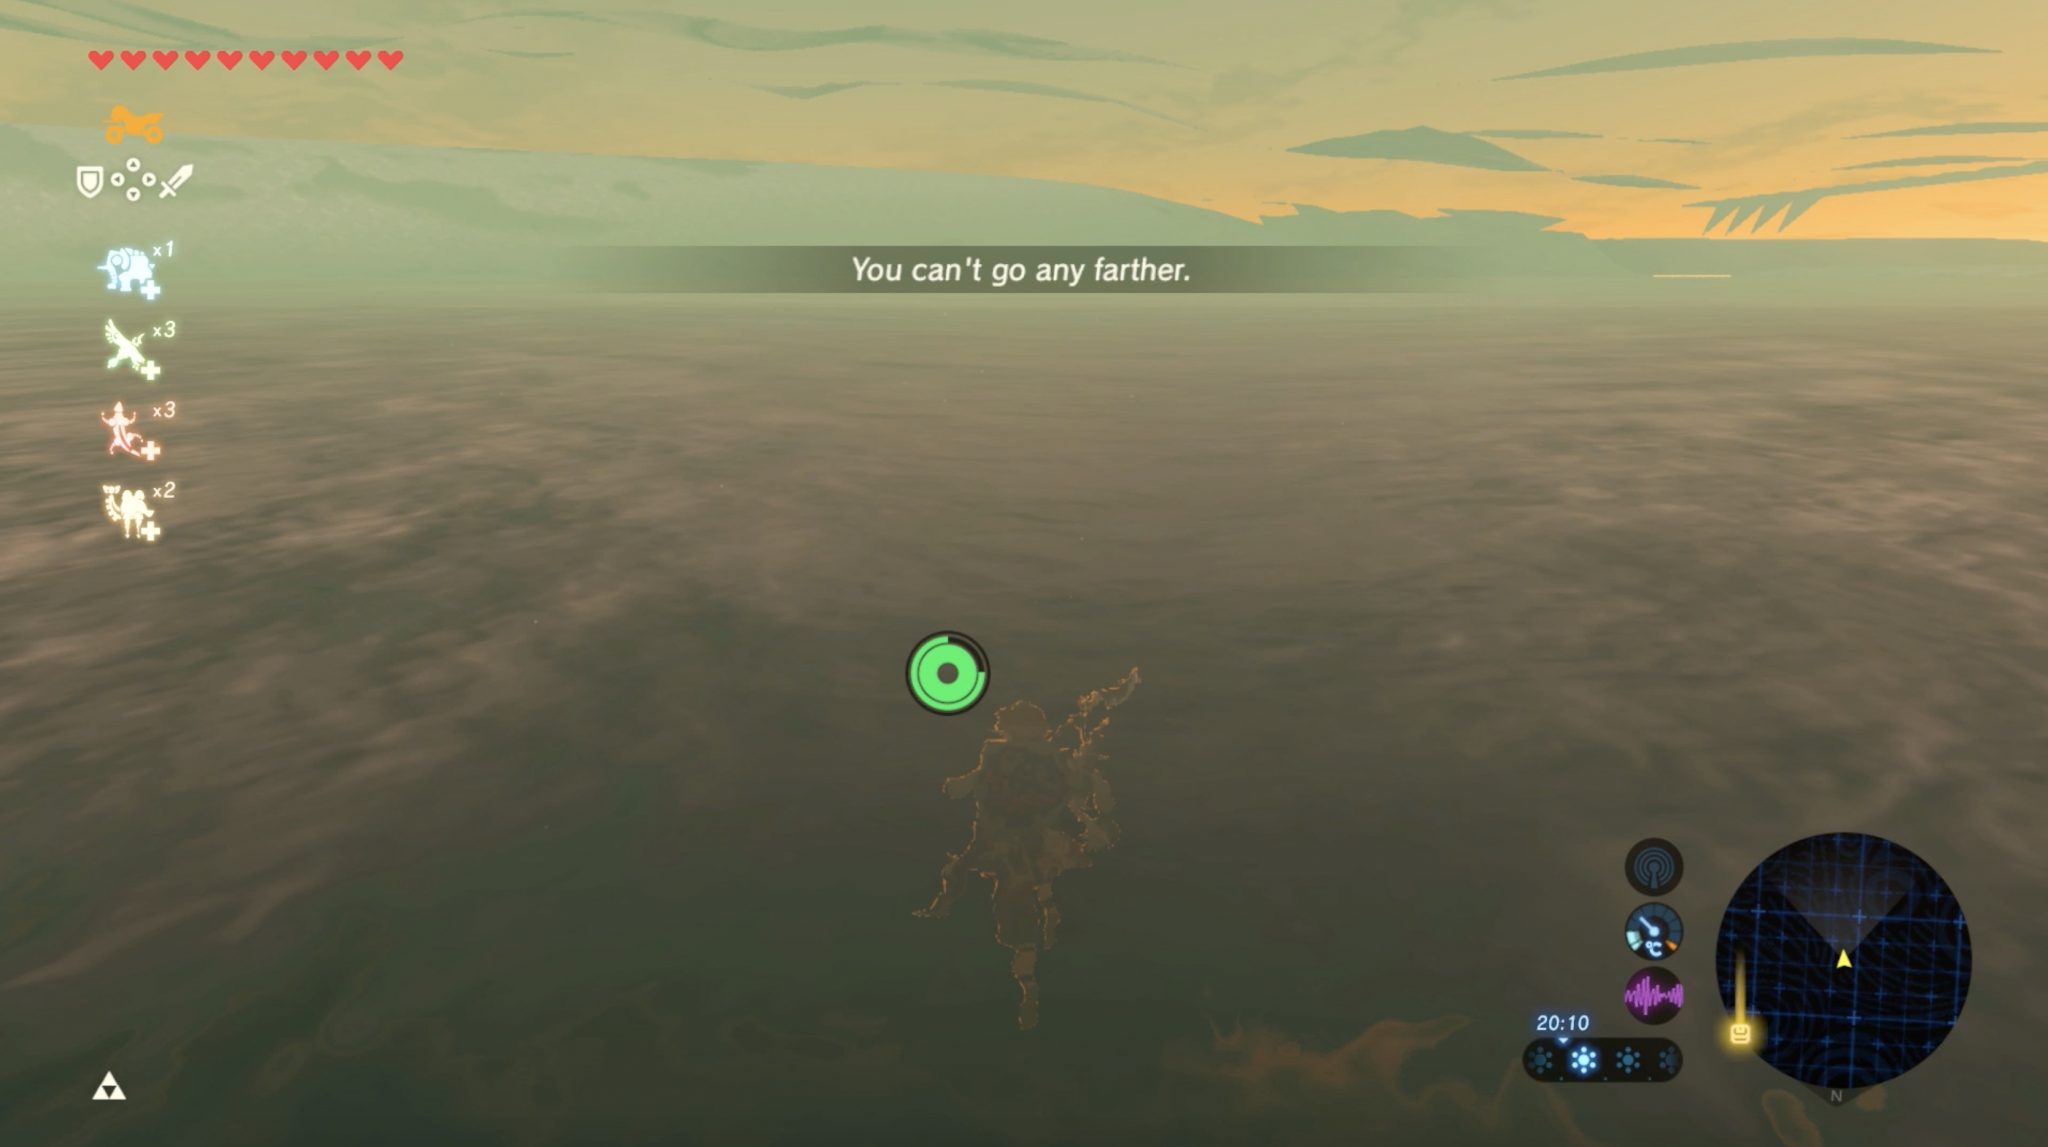 How to Escape Hyrule in the Legend of Zelda Breath of the Wild | Gaming ...